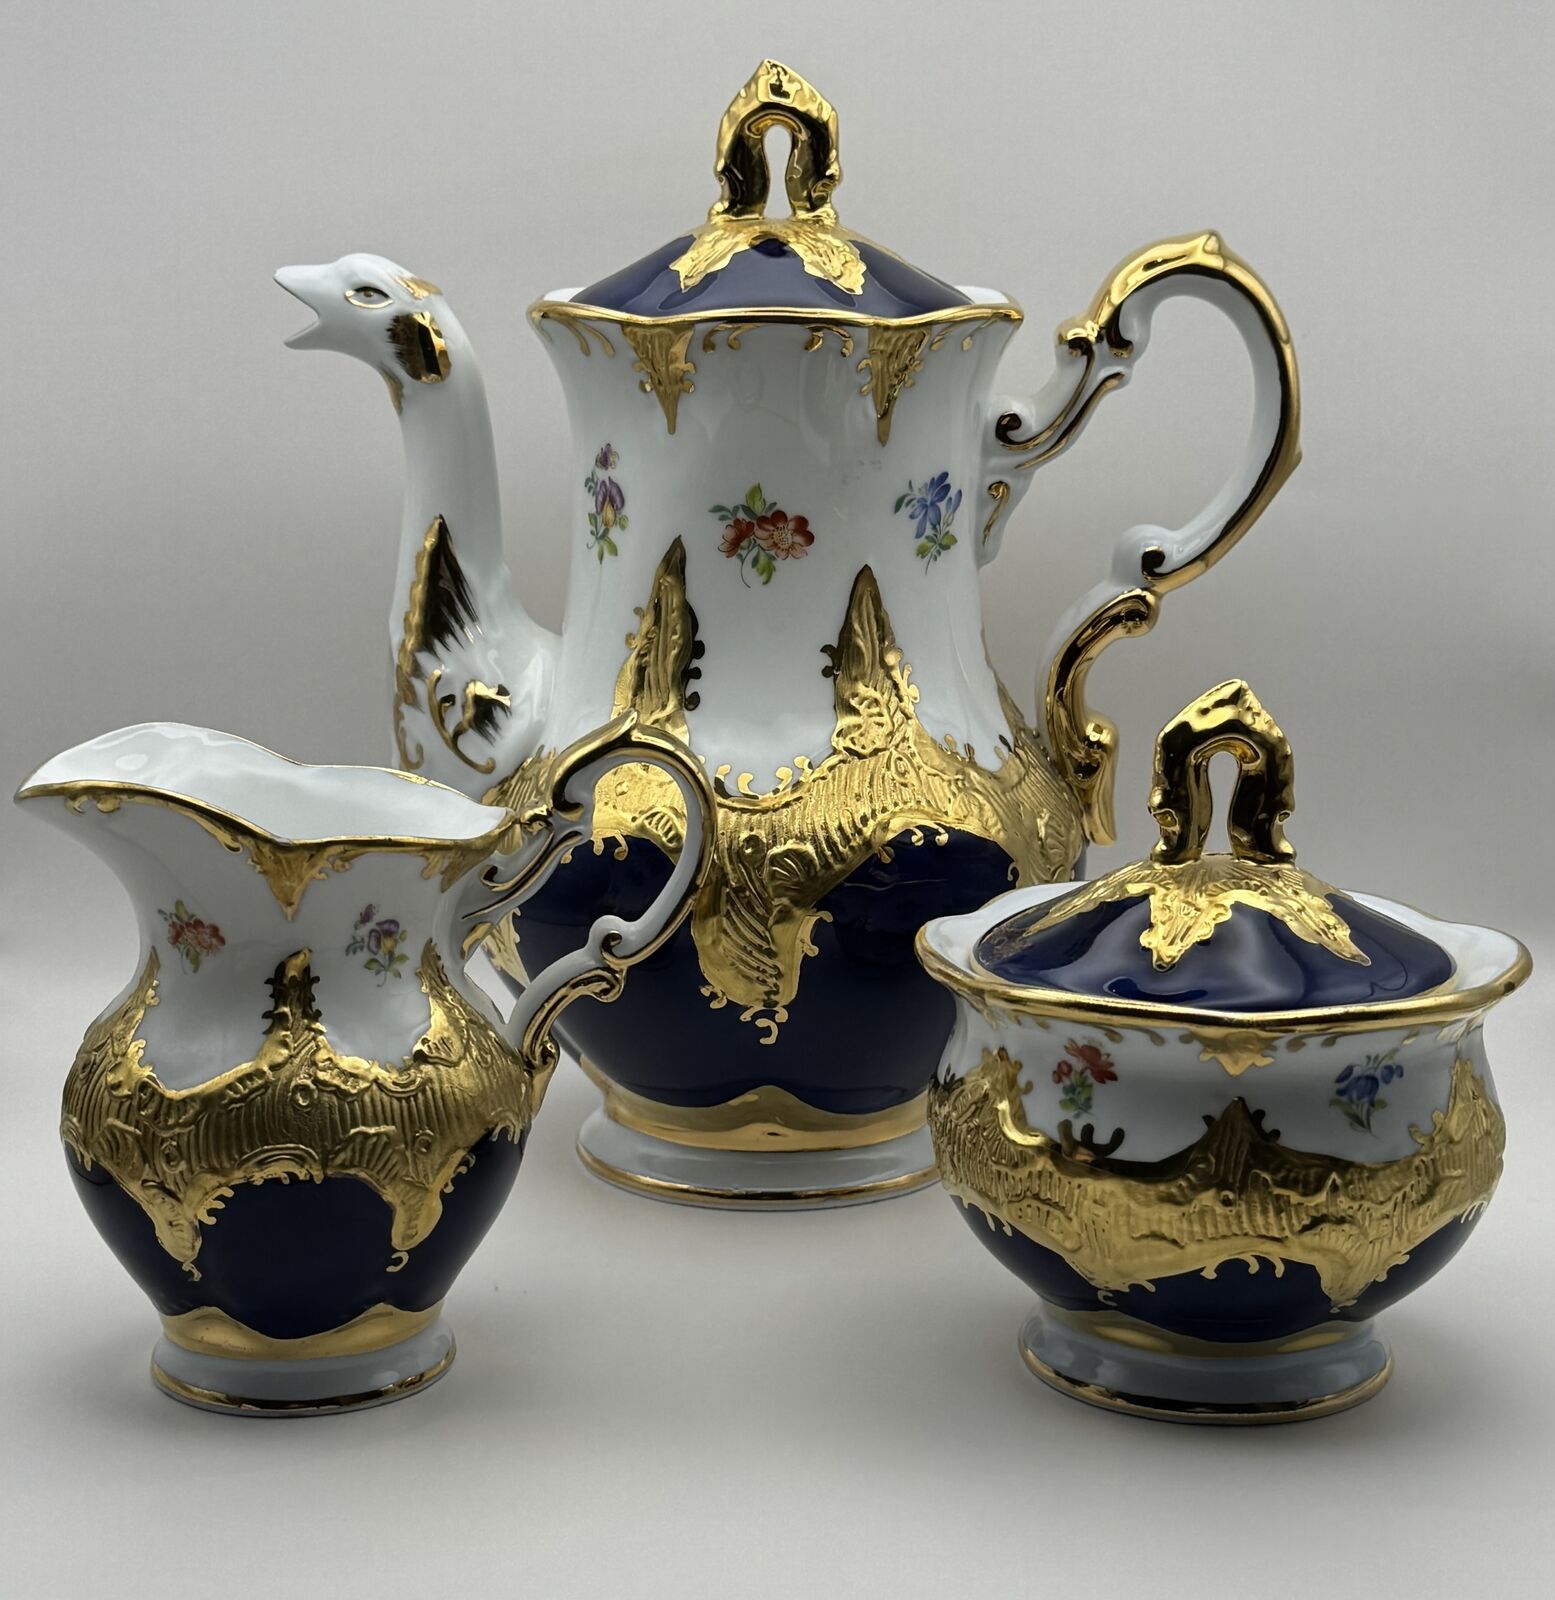 Rare Limoges 8 Piece Set in the Style of B Form Meissen